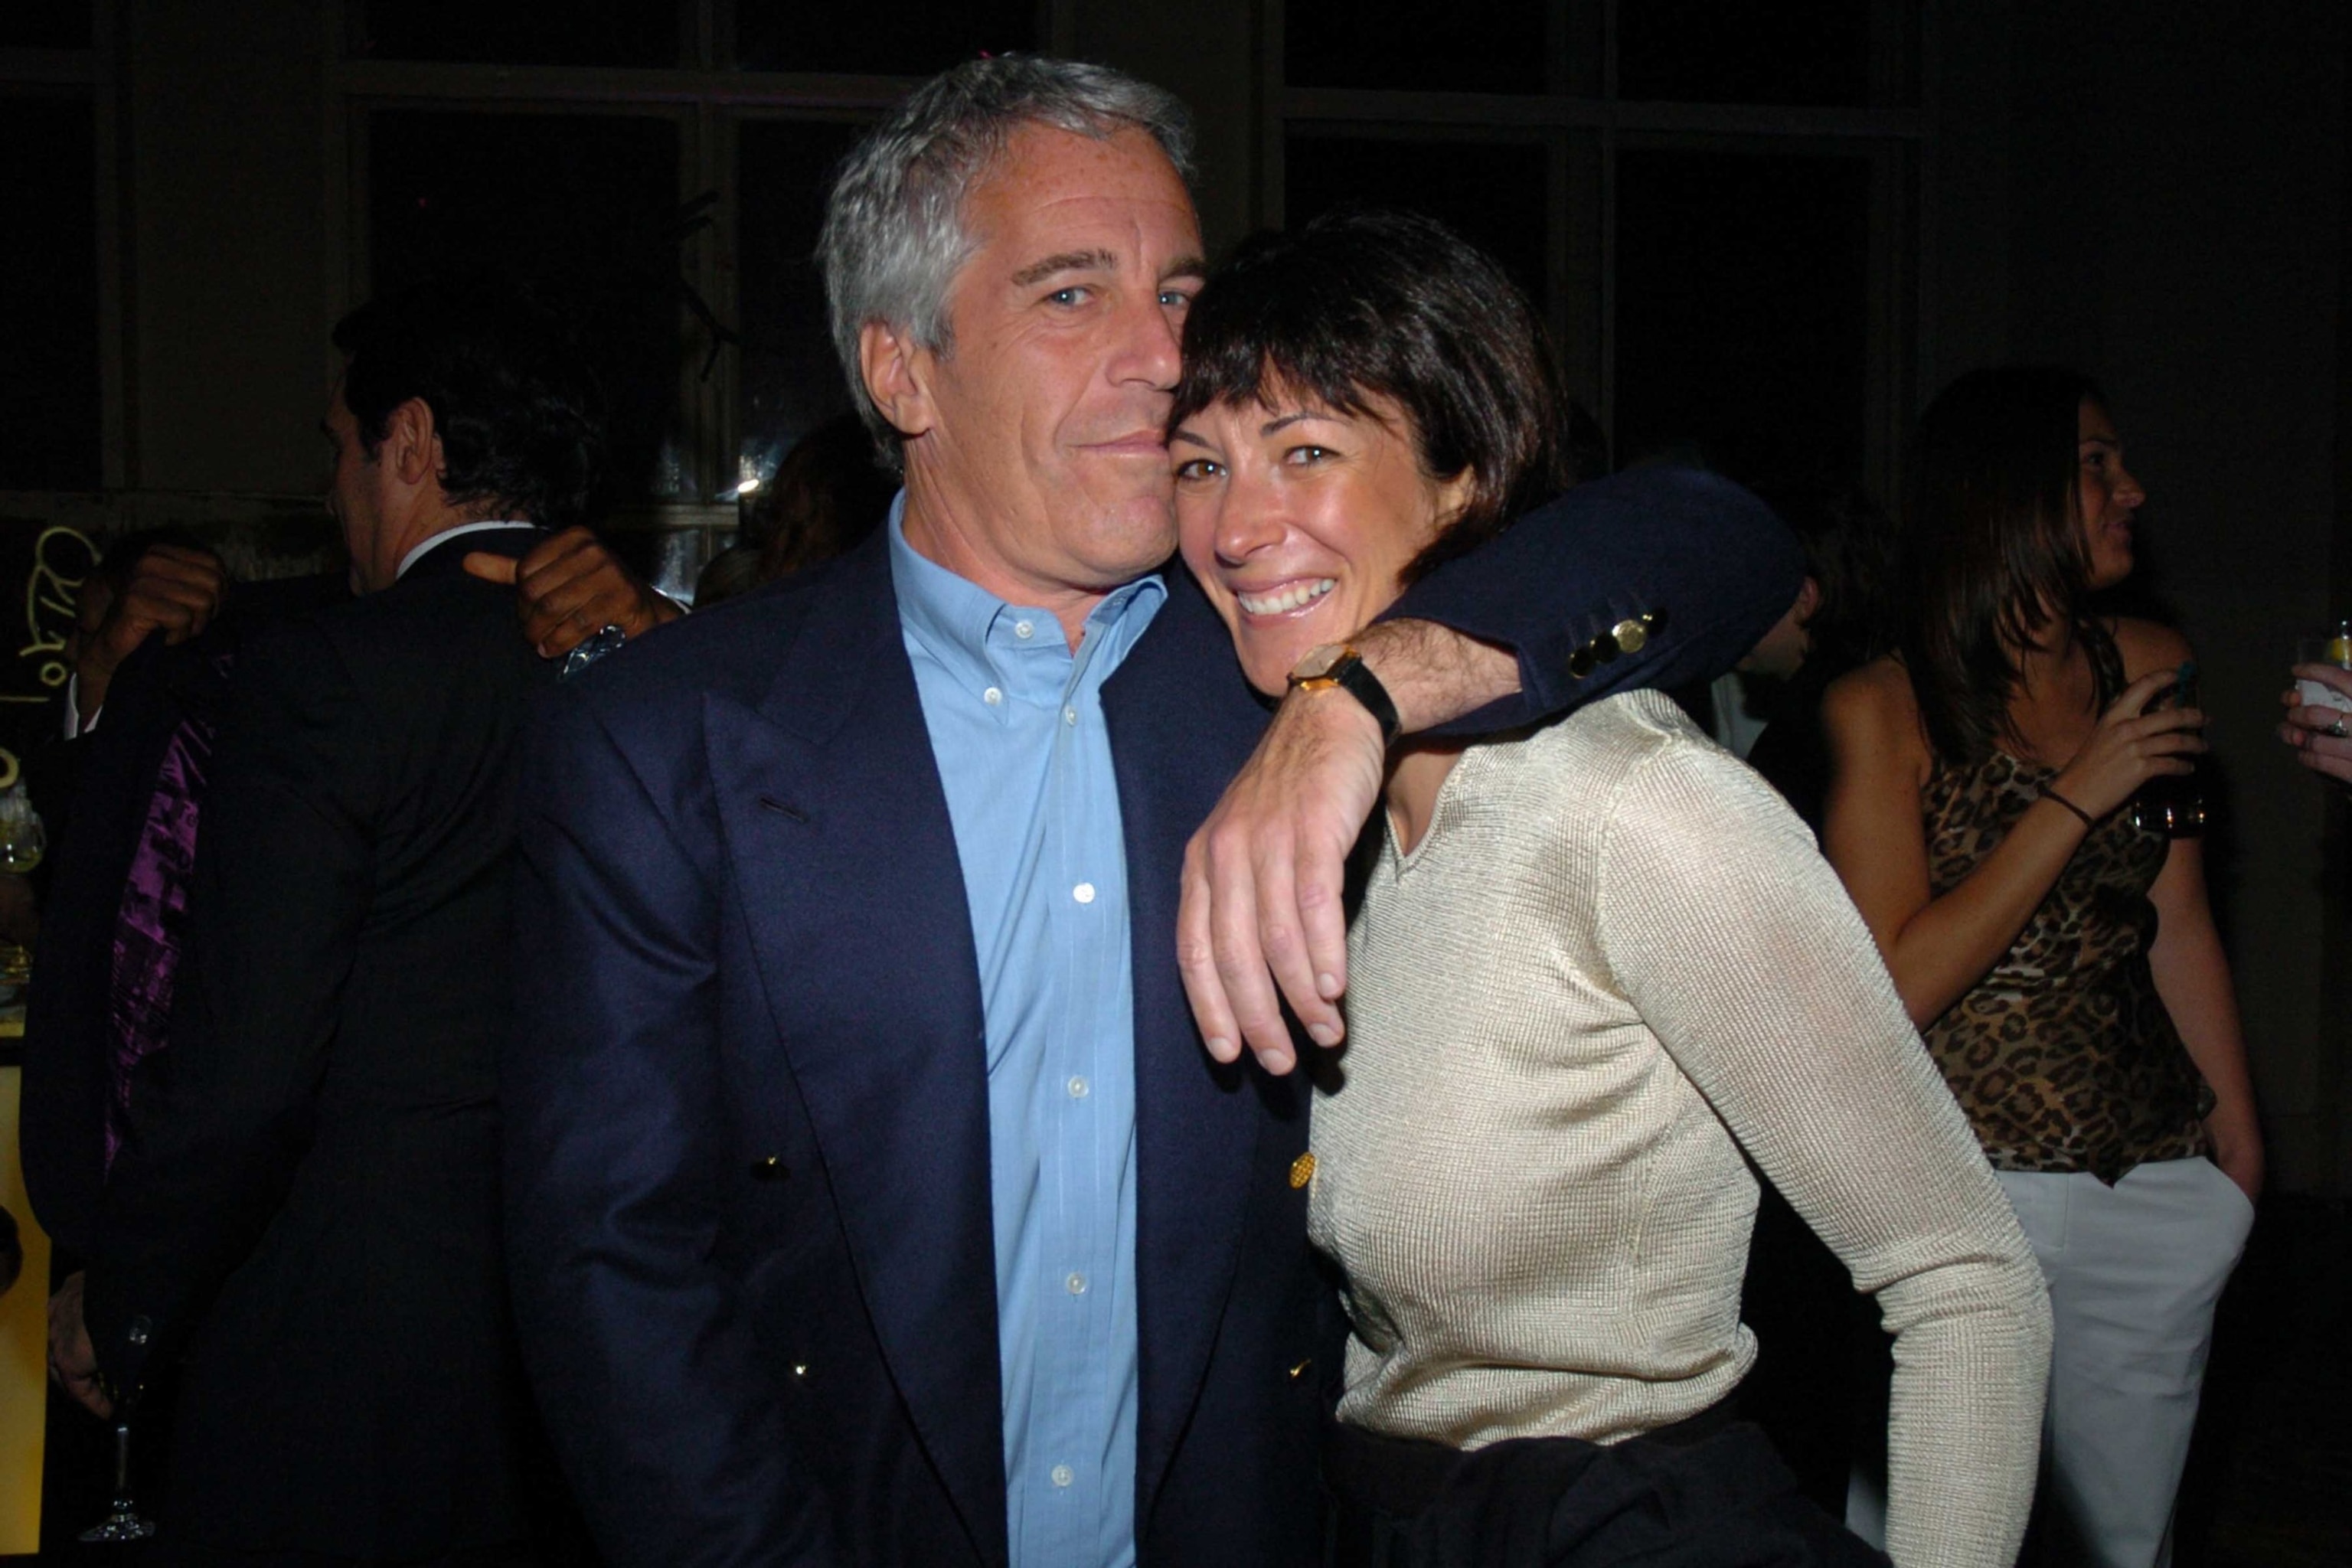 PHOTO: Jeffrey Epstein and Ghislaine Maxwell at Cipriani Wall Street on March 15, 2005 in New York City.